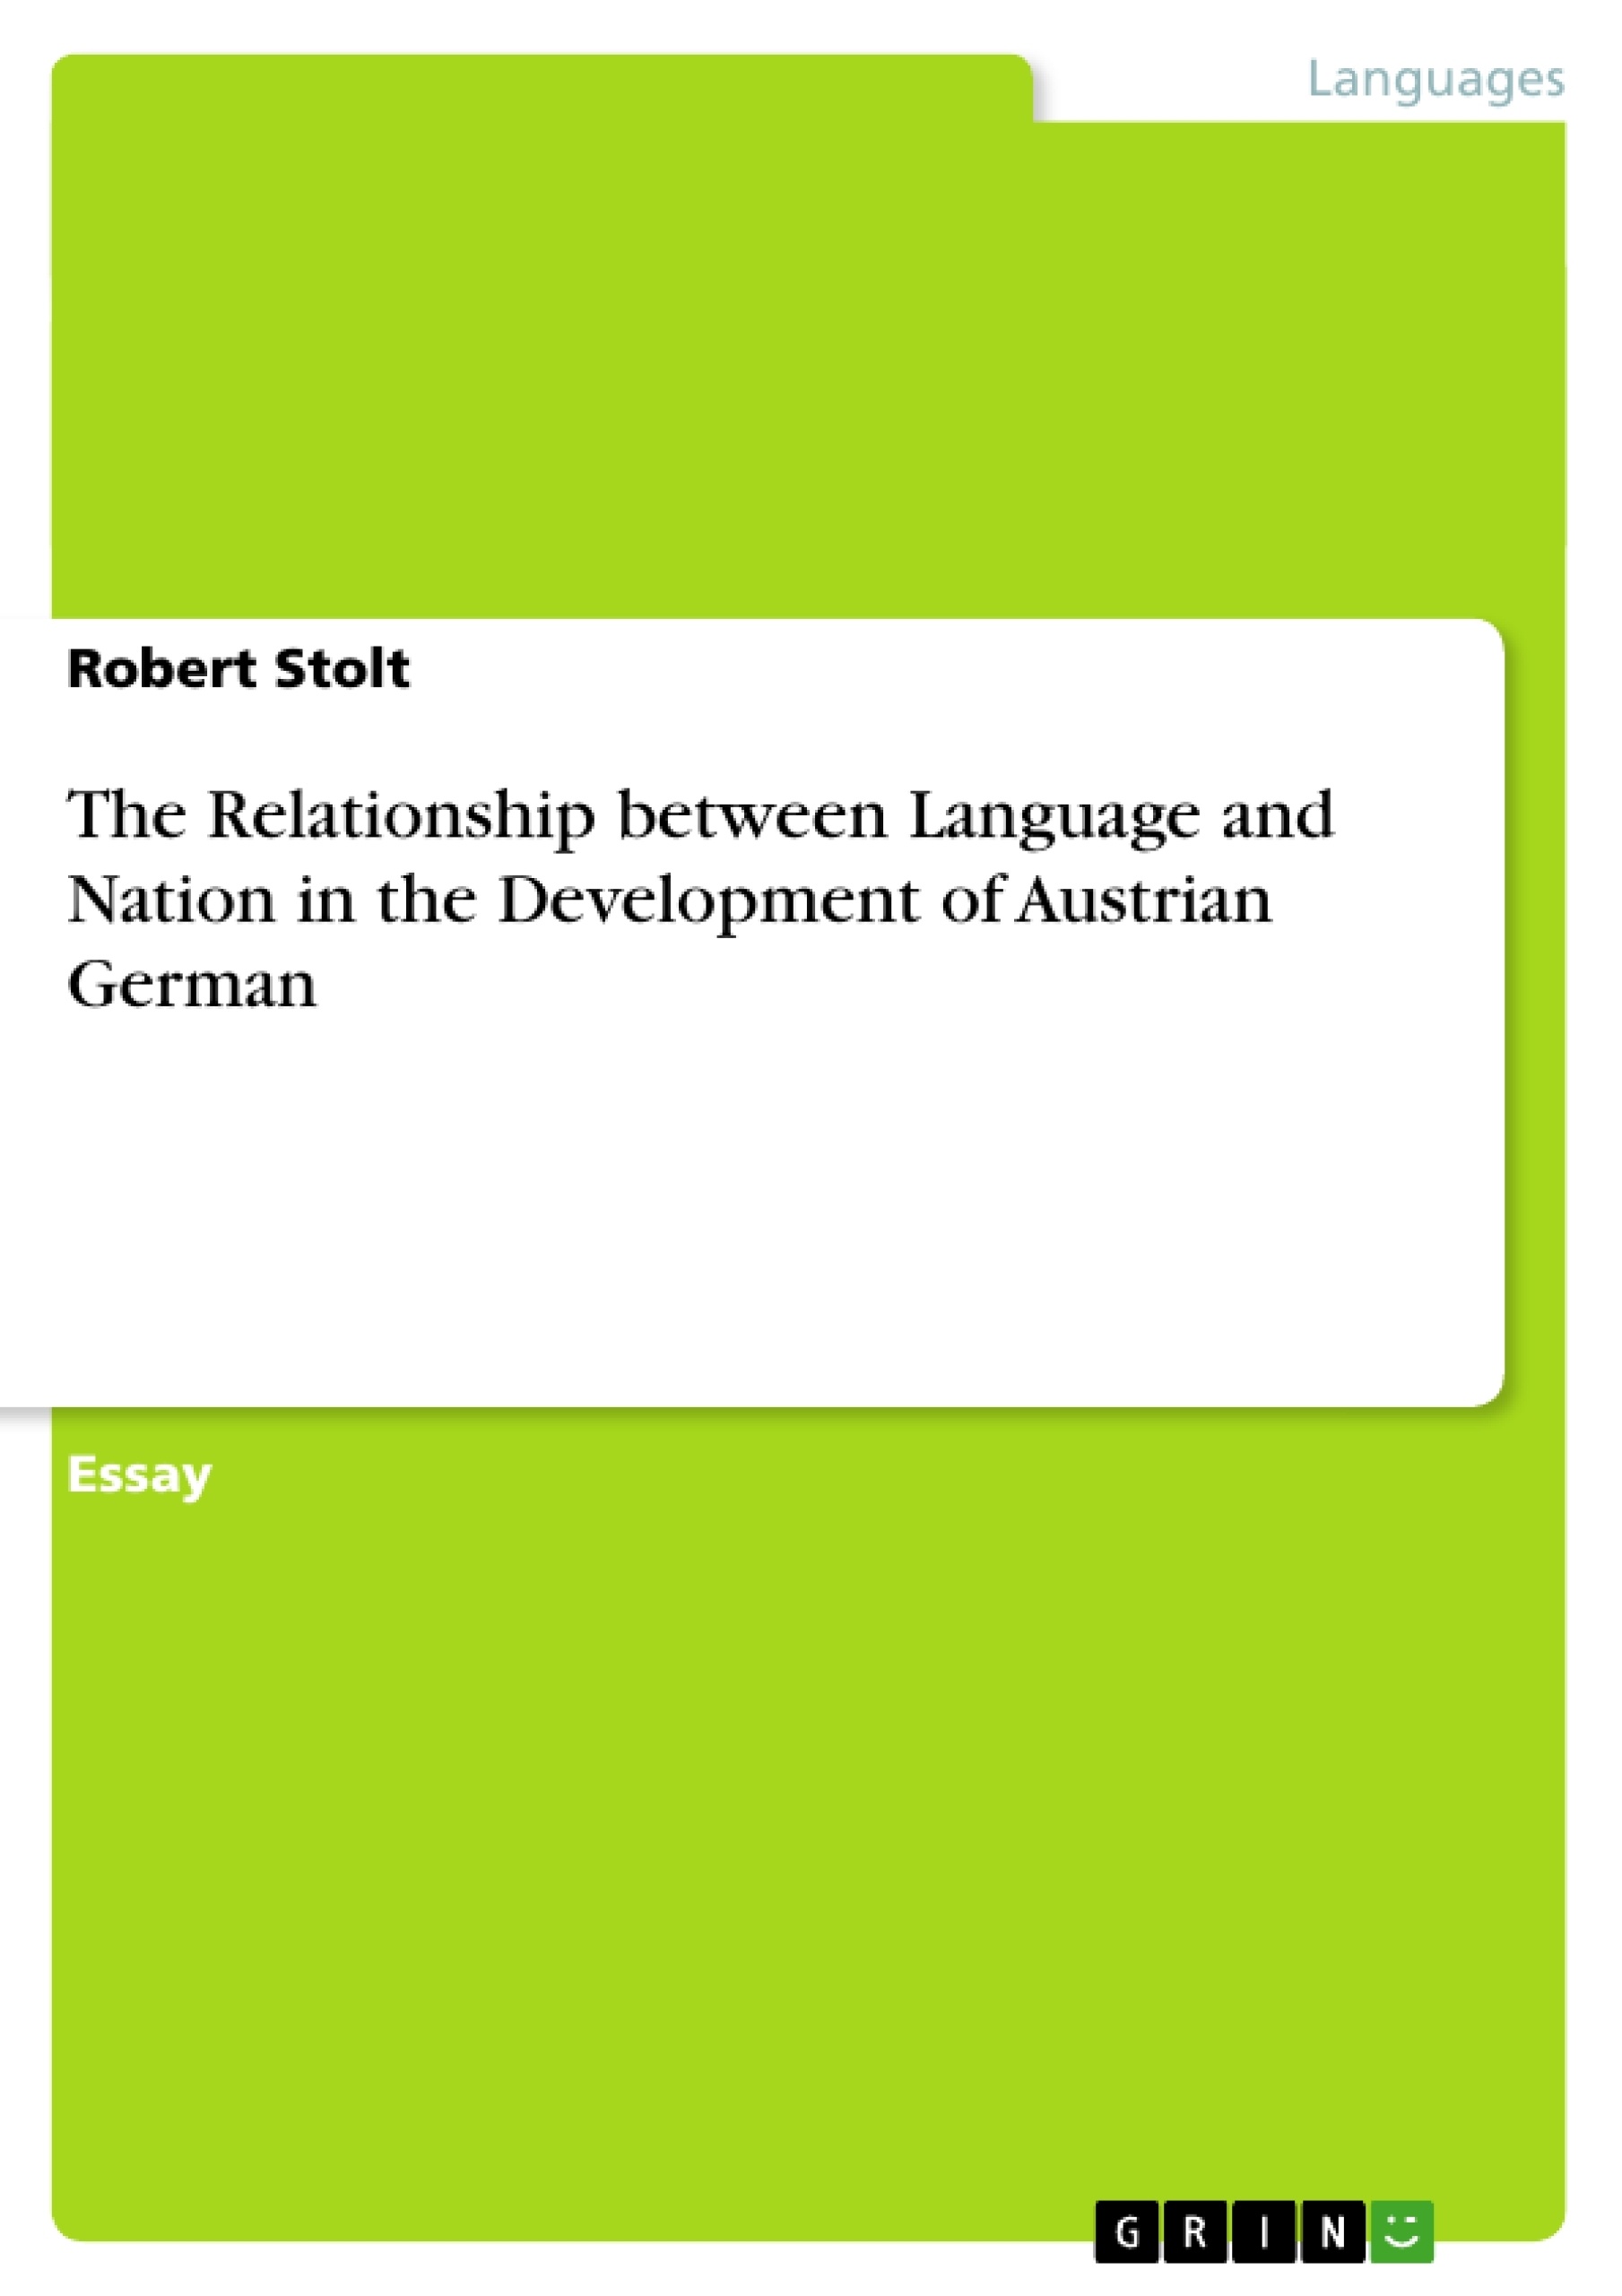 Title: The Relationship between Language and Nation in the Development of Austrian German